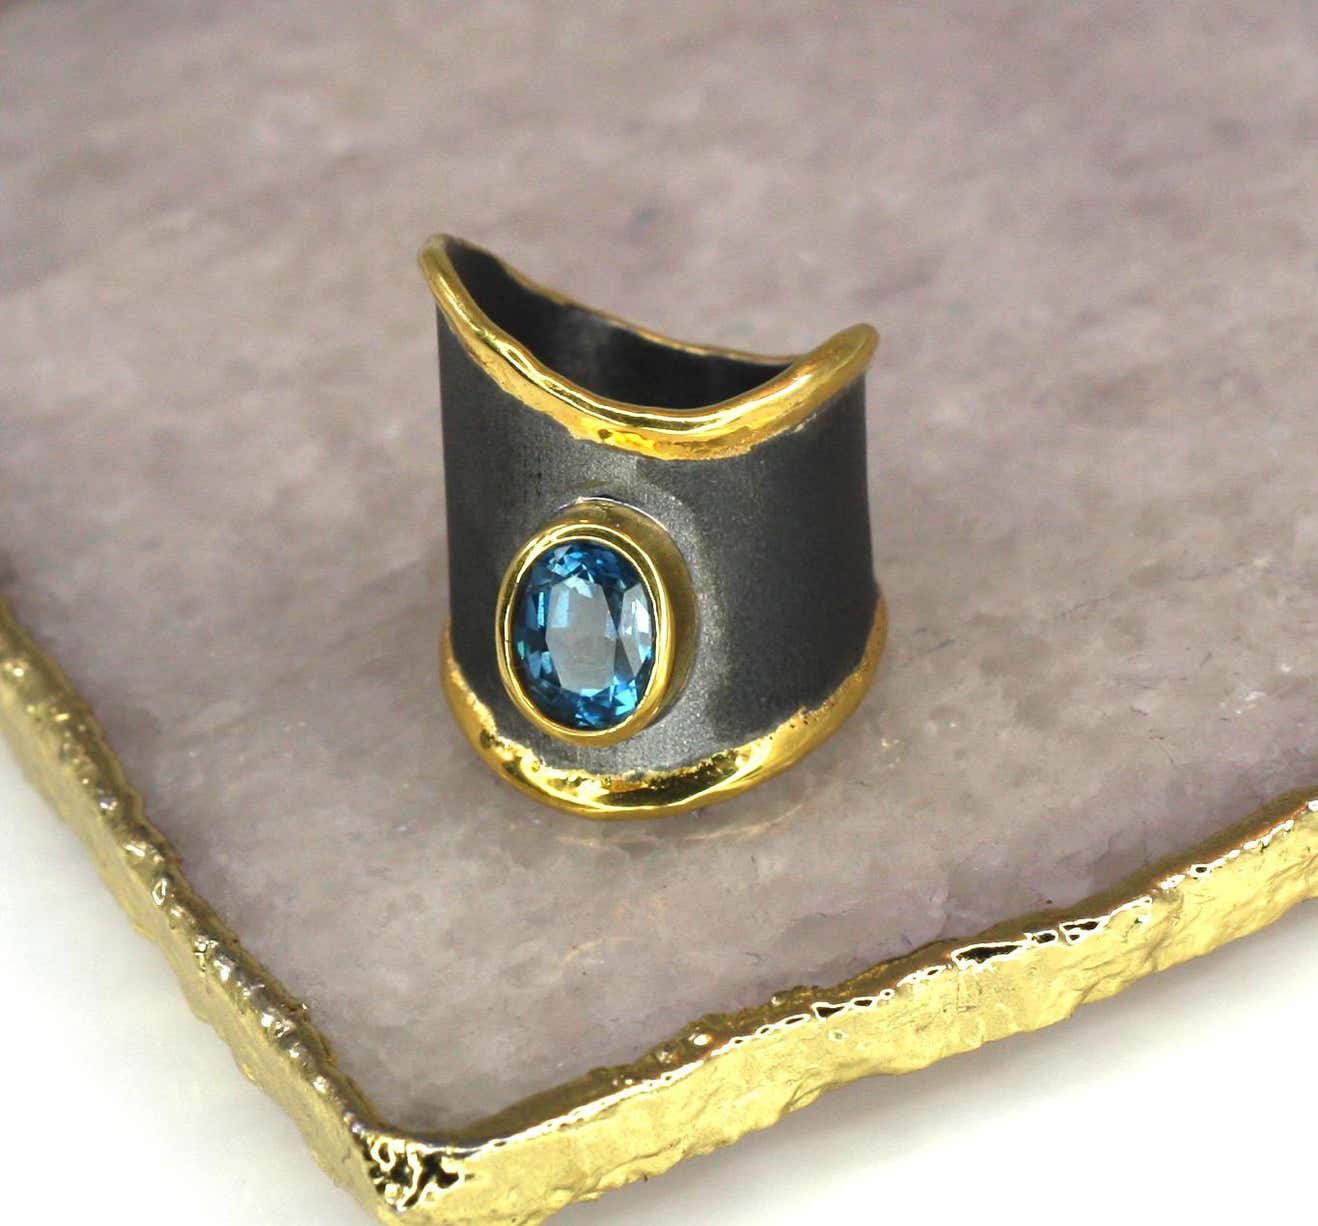 Eclyps 1.60 Carat Topaz Ring in Silver with Black Ruthenium and Gold